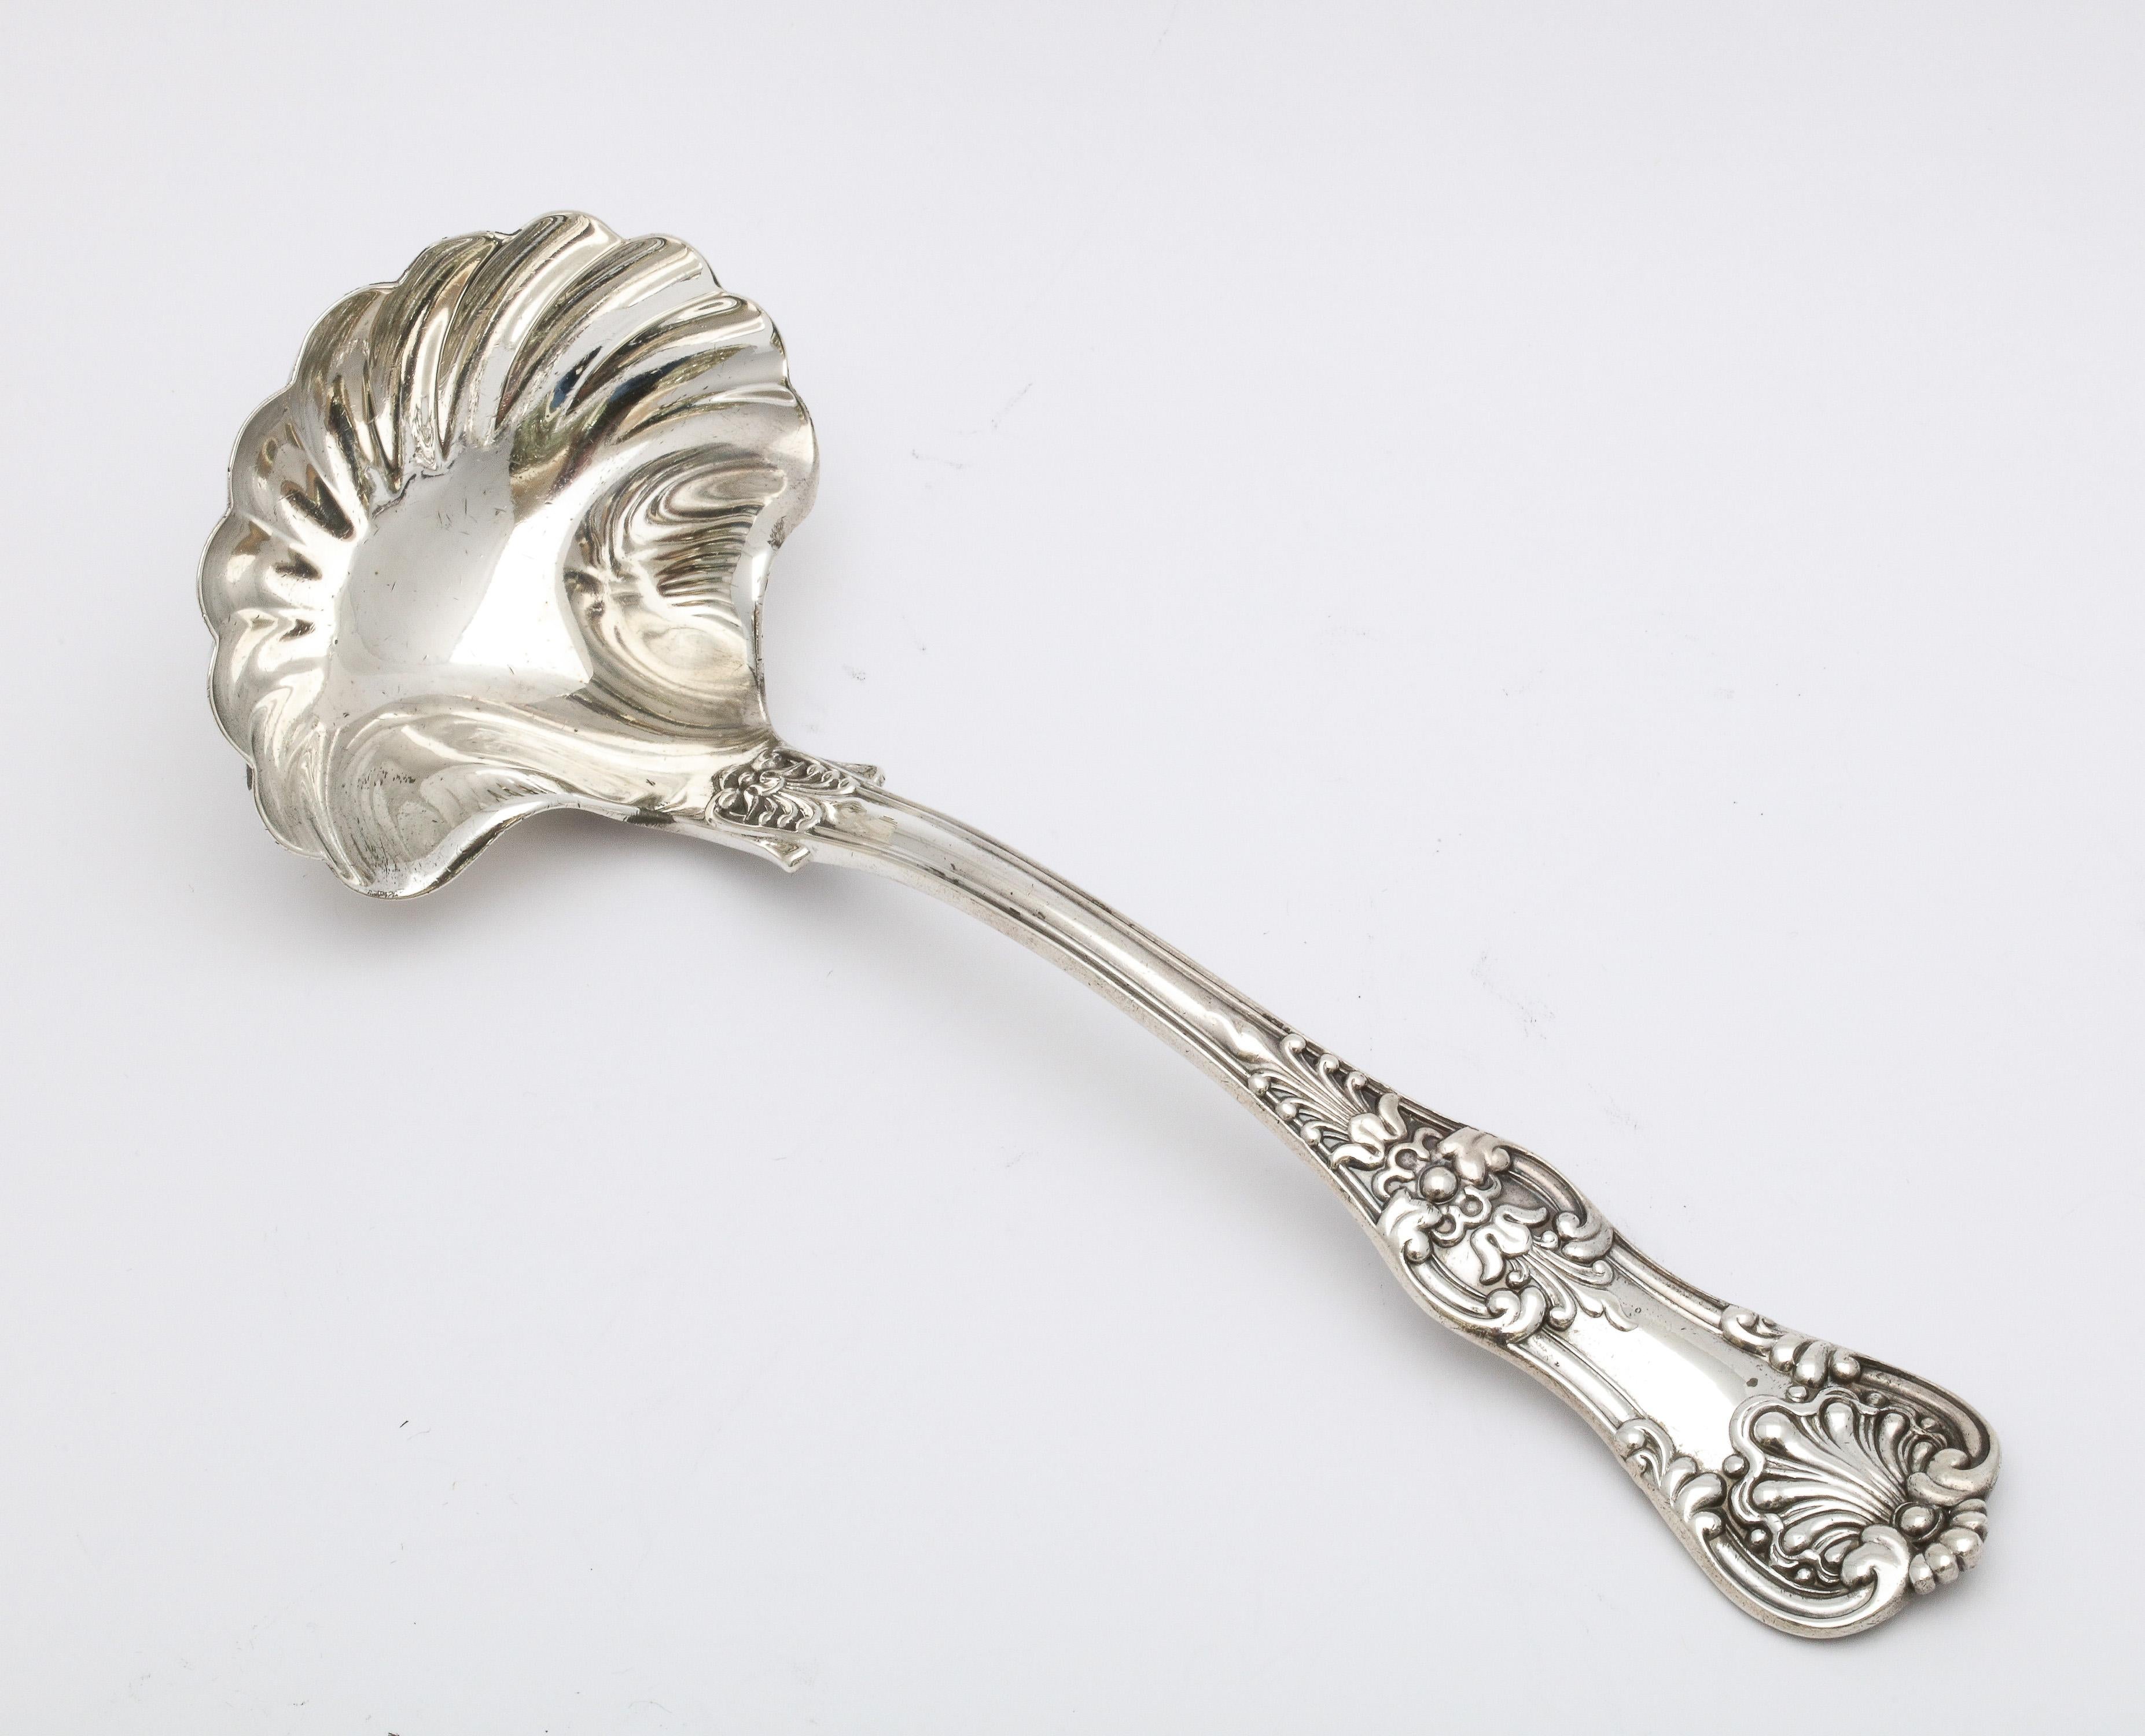 Antique, Victorian Period, sterling silver sauce ladle, Tiffany and Co., New York, Ca. 1885. Lovely design. Measures almost 7 1/2 inches long x 2 3/4 inches deep across the bowl of the ladle (widest point) x 2 inches high when lying flat.  Weighs